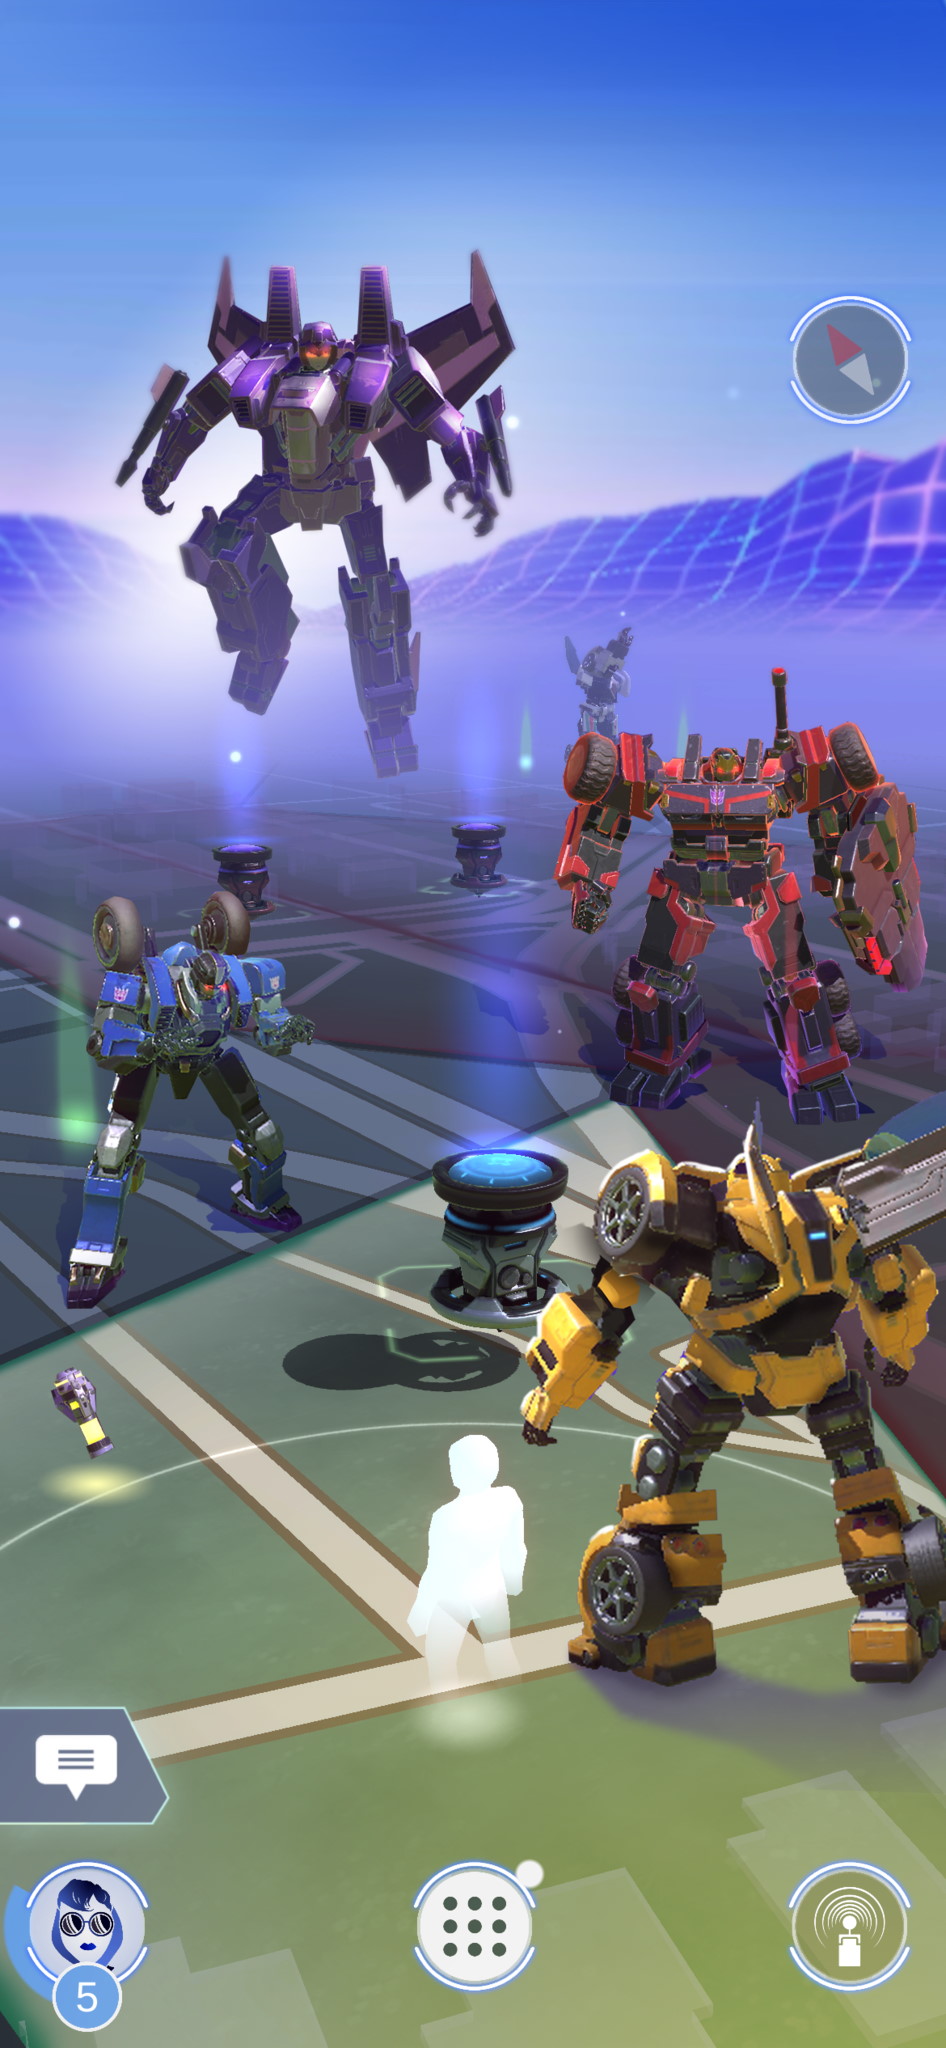 Transformers Heavy Metal is a new mobile game built on Pokemon Go tech